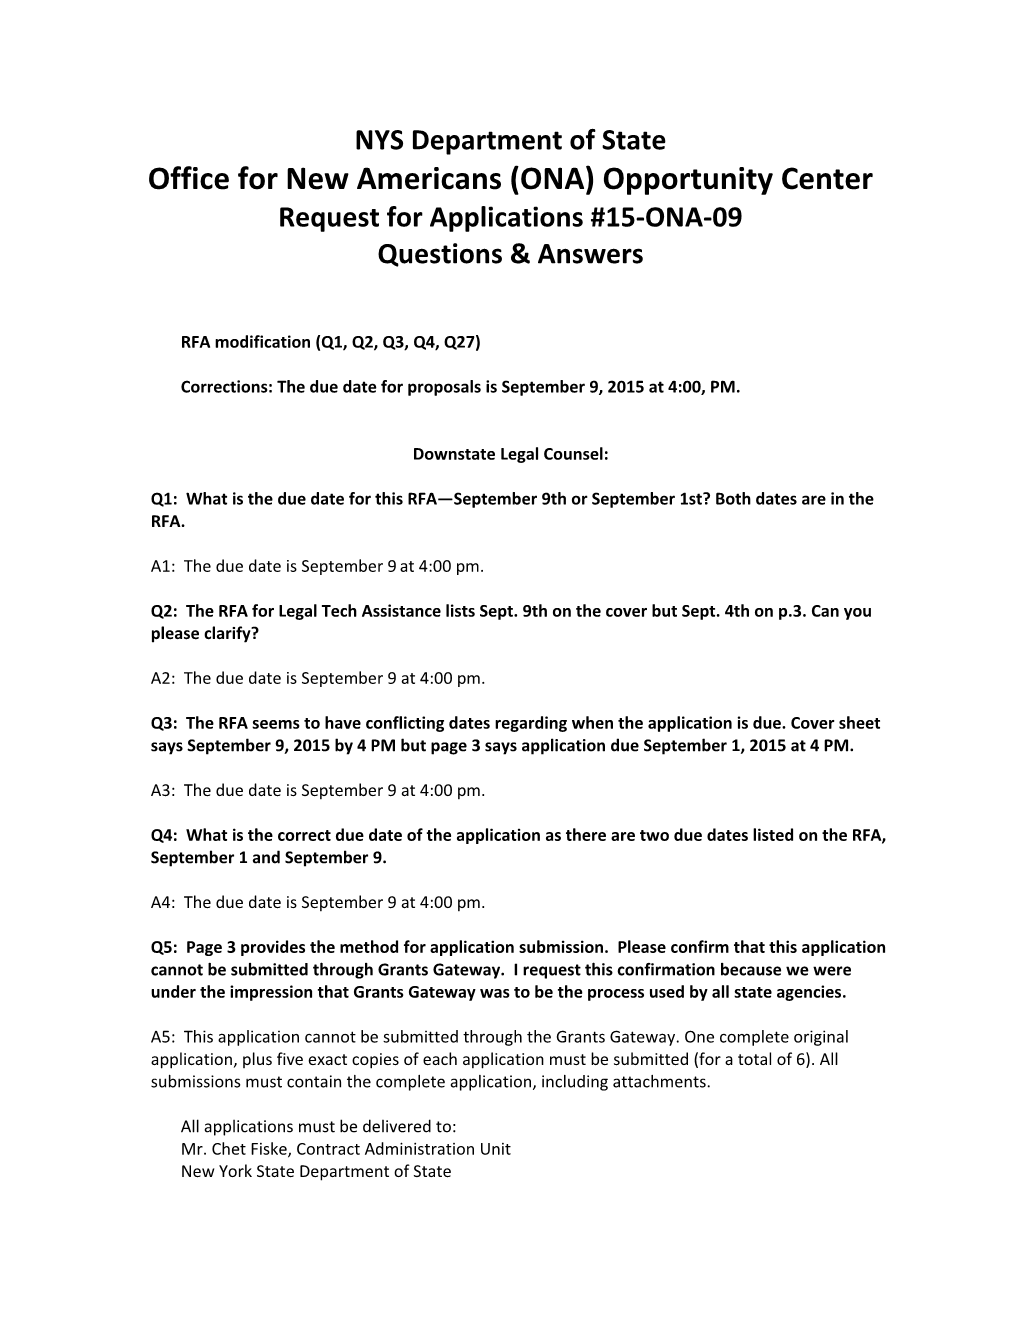 Office for New Americans (ONA) Opportunity Center